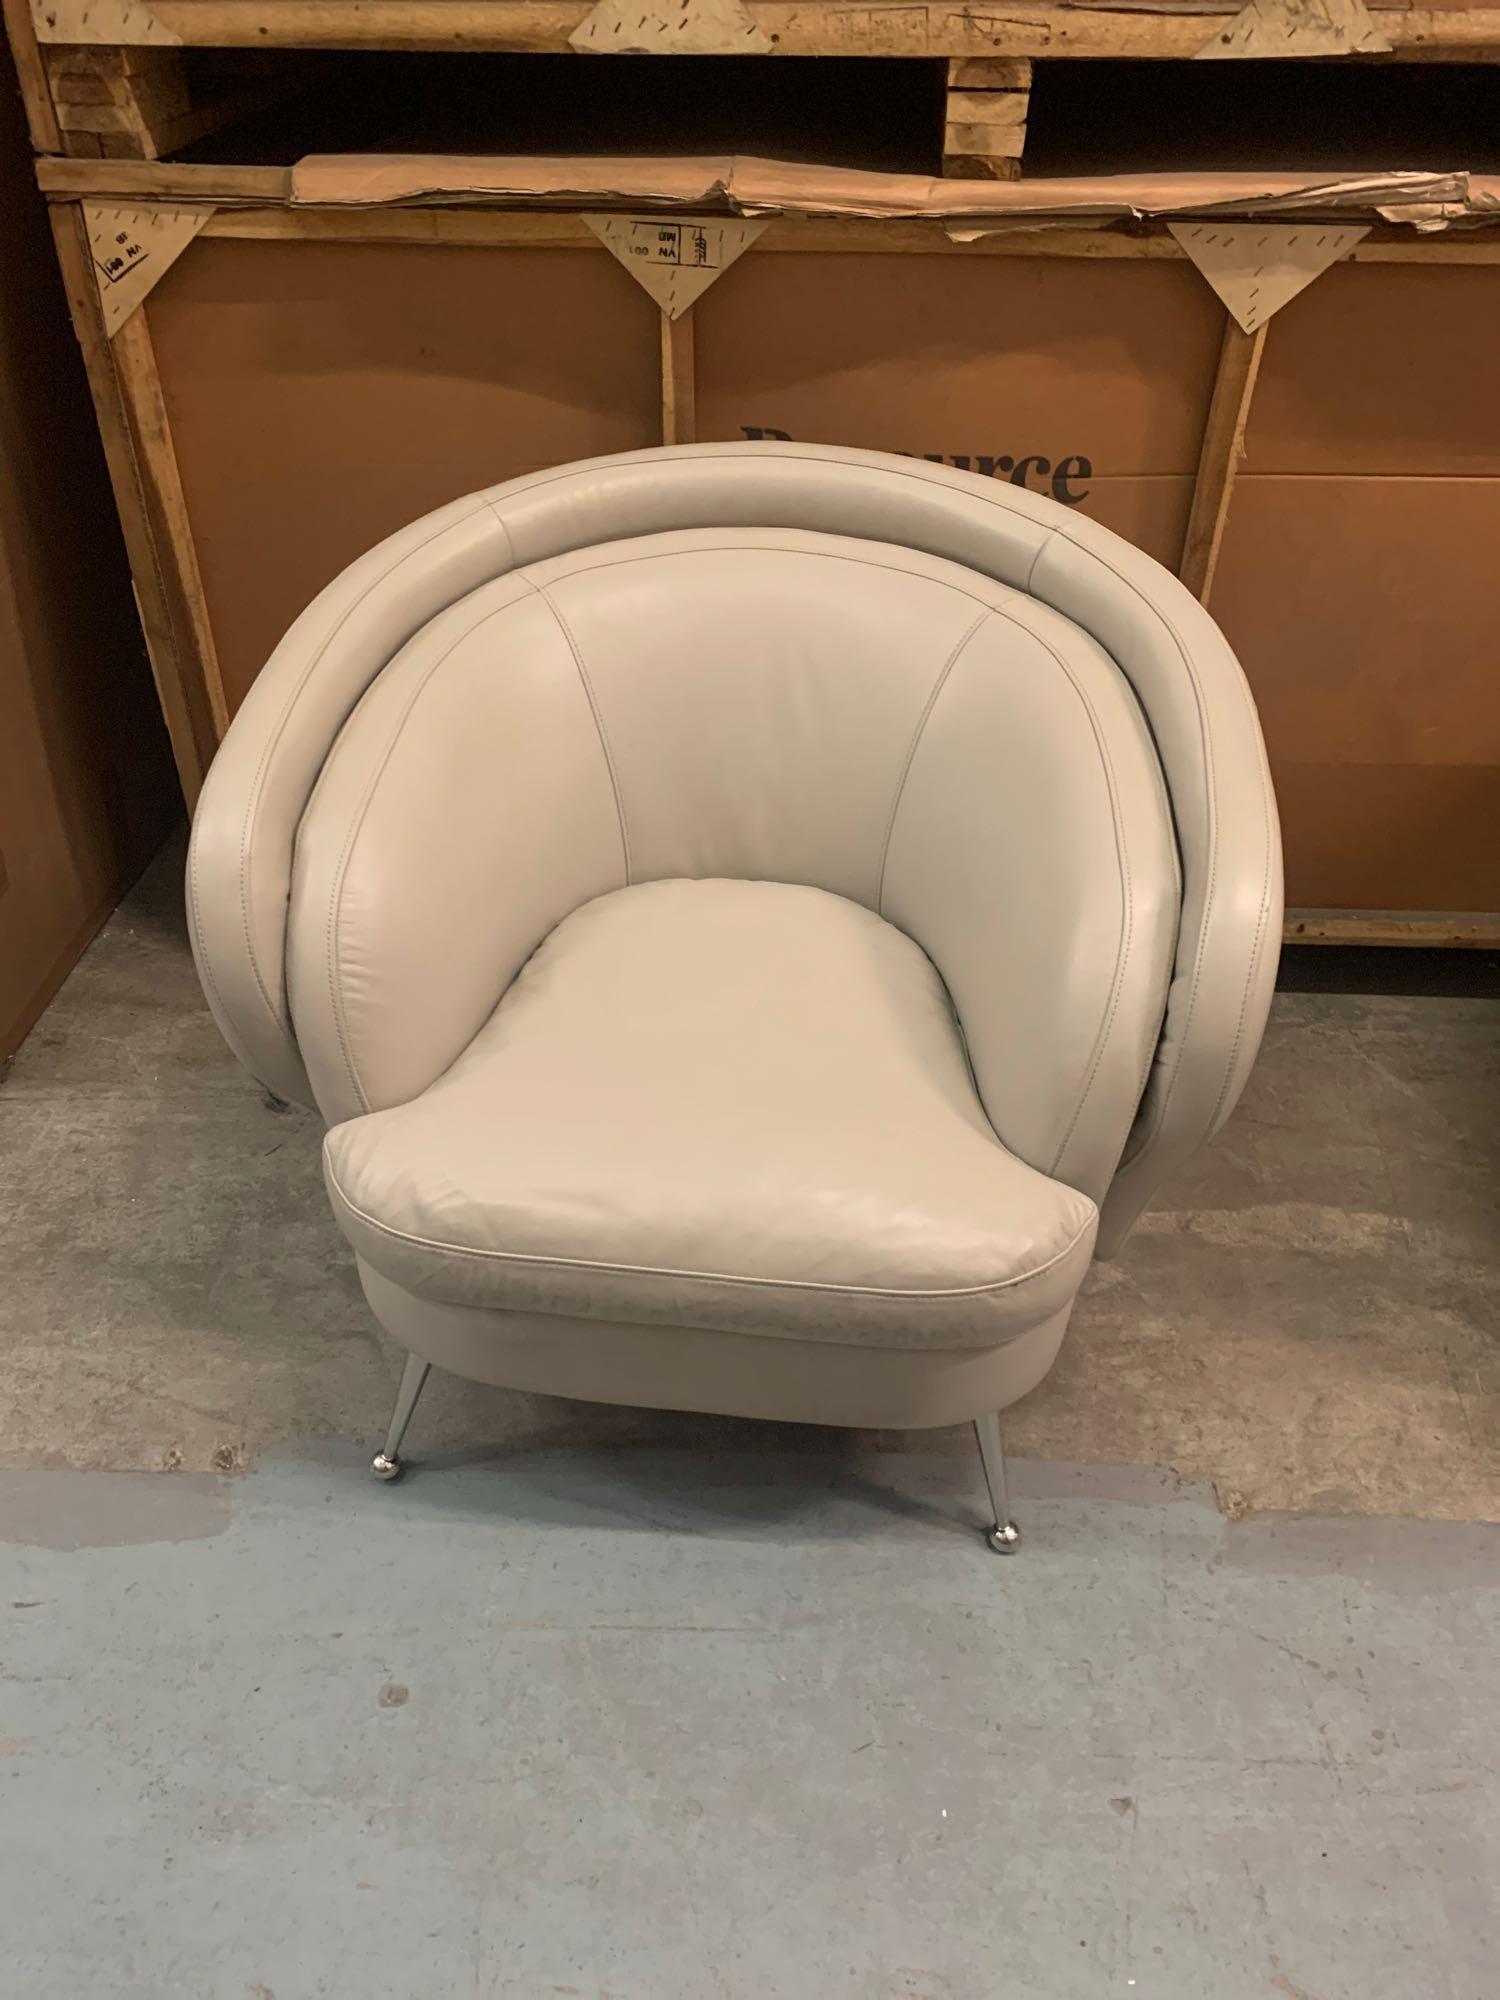 Tesoro Tub Chair Cream Full Leather The Tesoro Tub Chair Is The Latest Addition To Our Range Of - Image 3 of 7